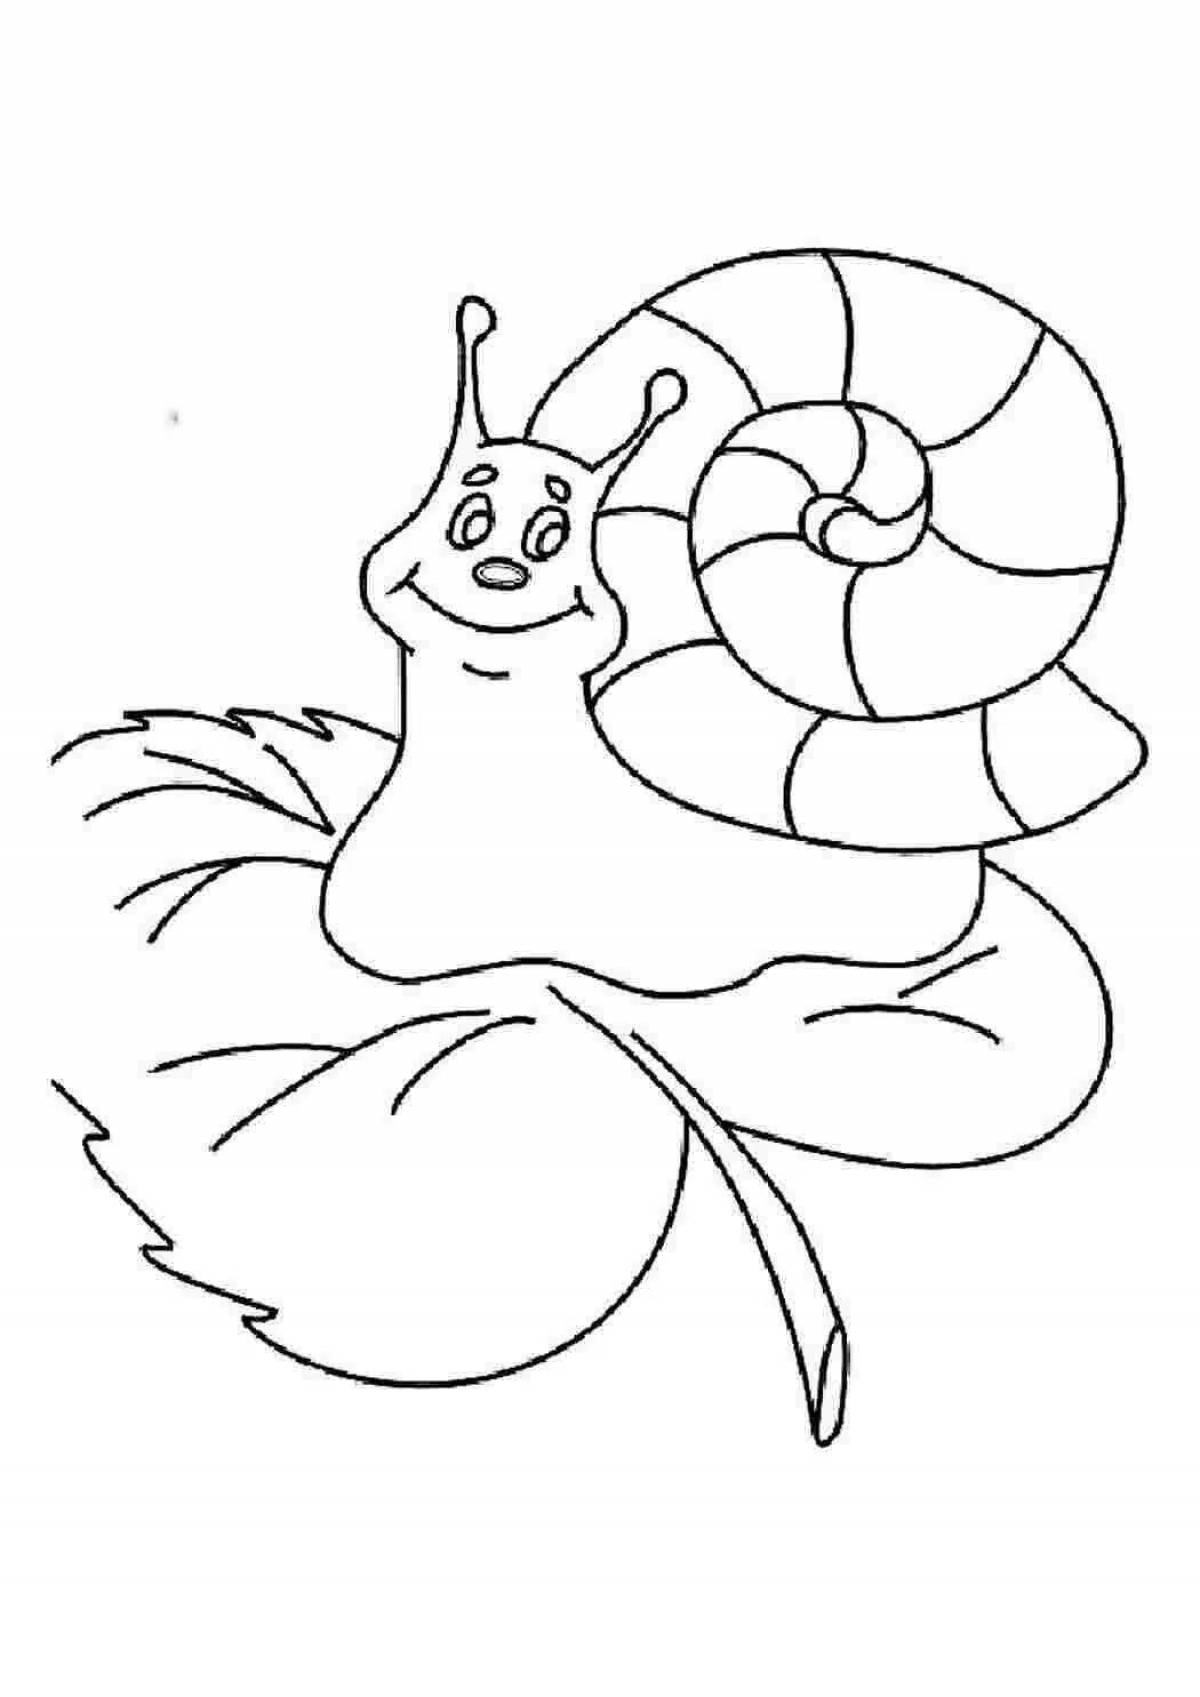 Snail drawing for kids #2